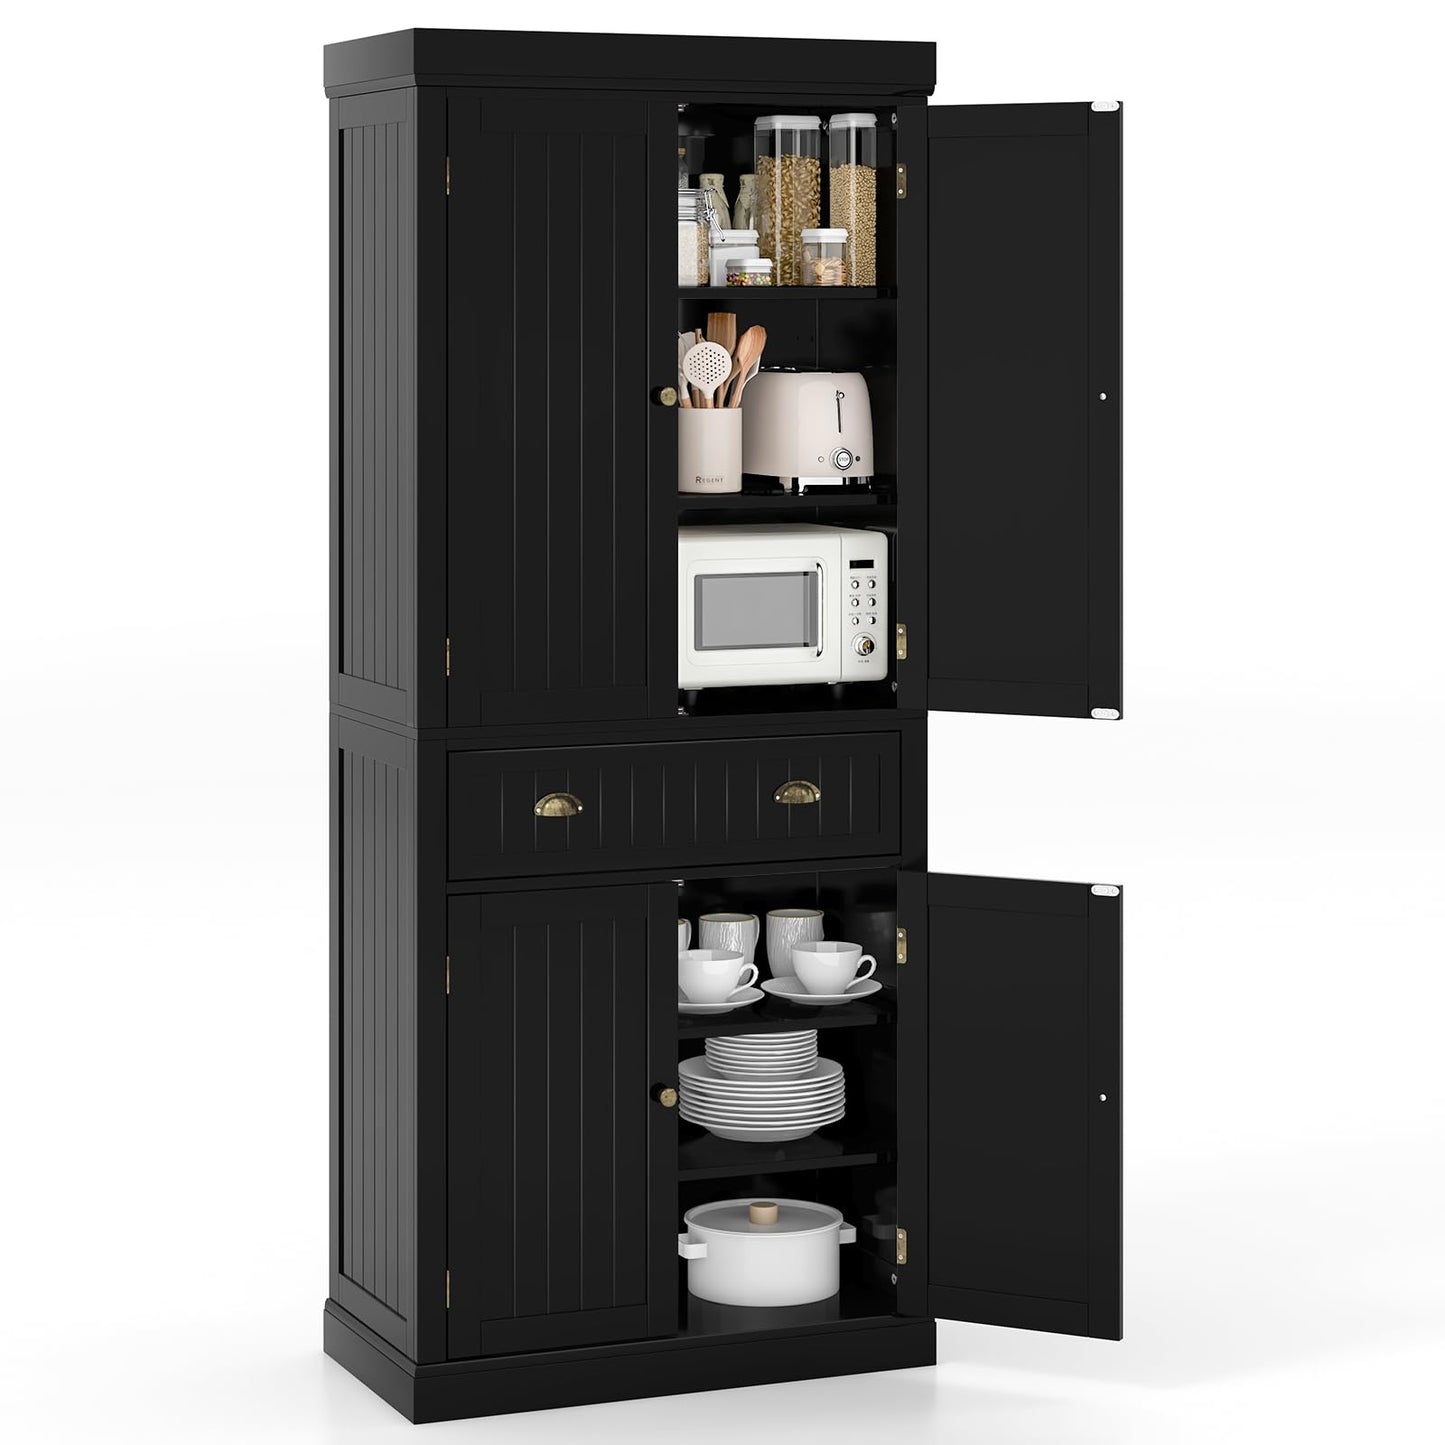 Tangkula 72" H Kitchen Pantry Cupboard Cabinet, Traditional Freestanding Large Tall Storage Cabinet with 2 Cabinets and Drawer, Adjustable Shelves,